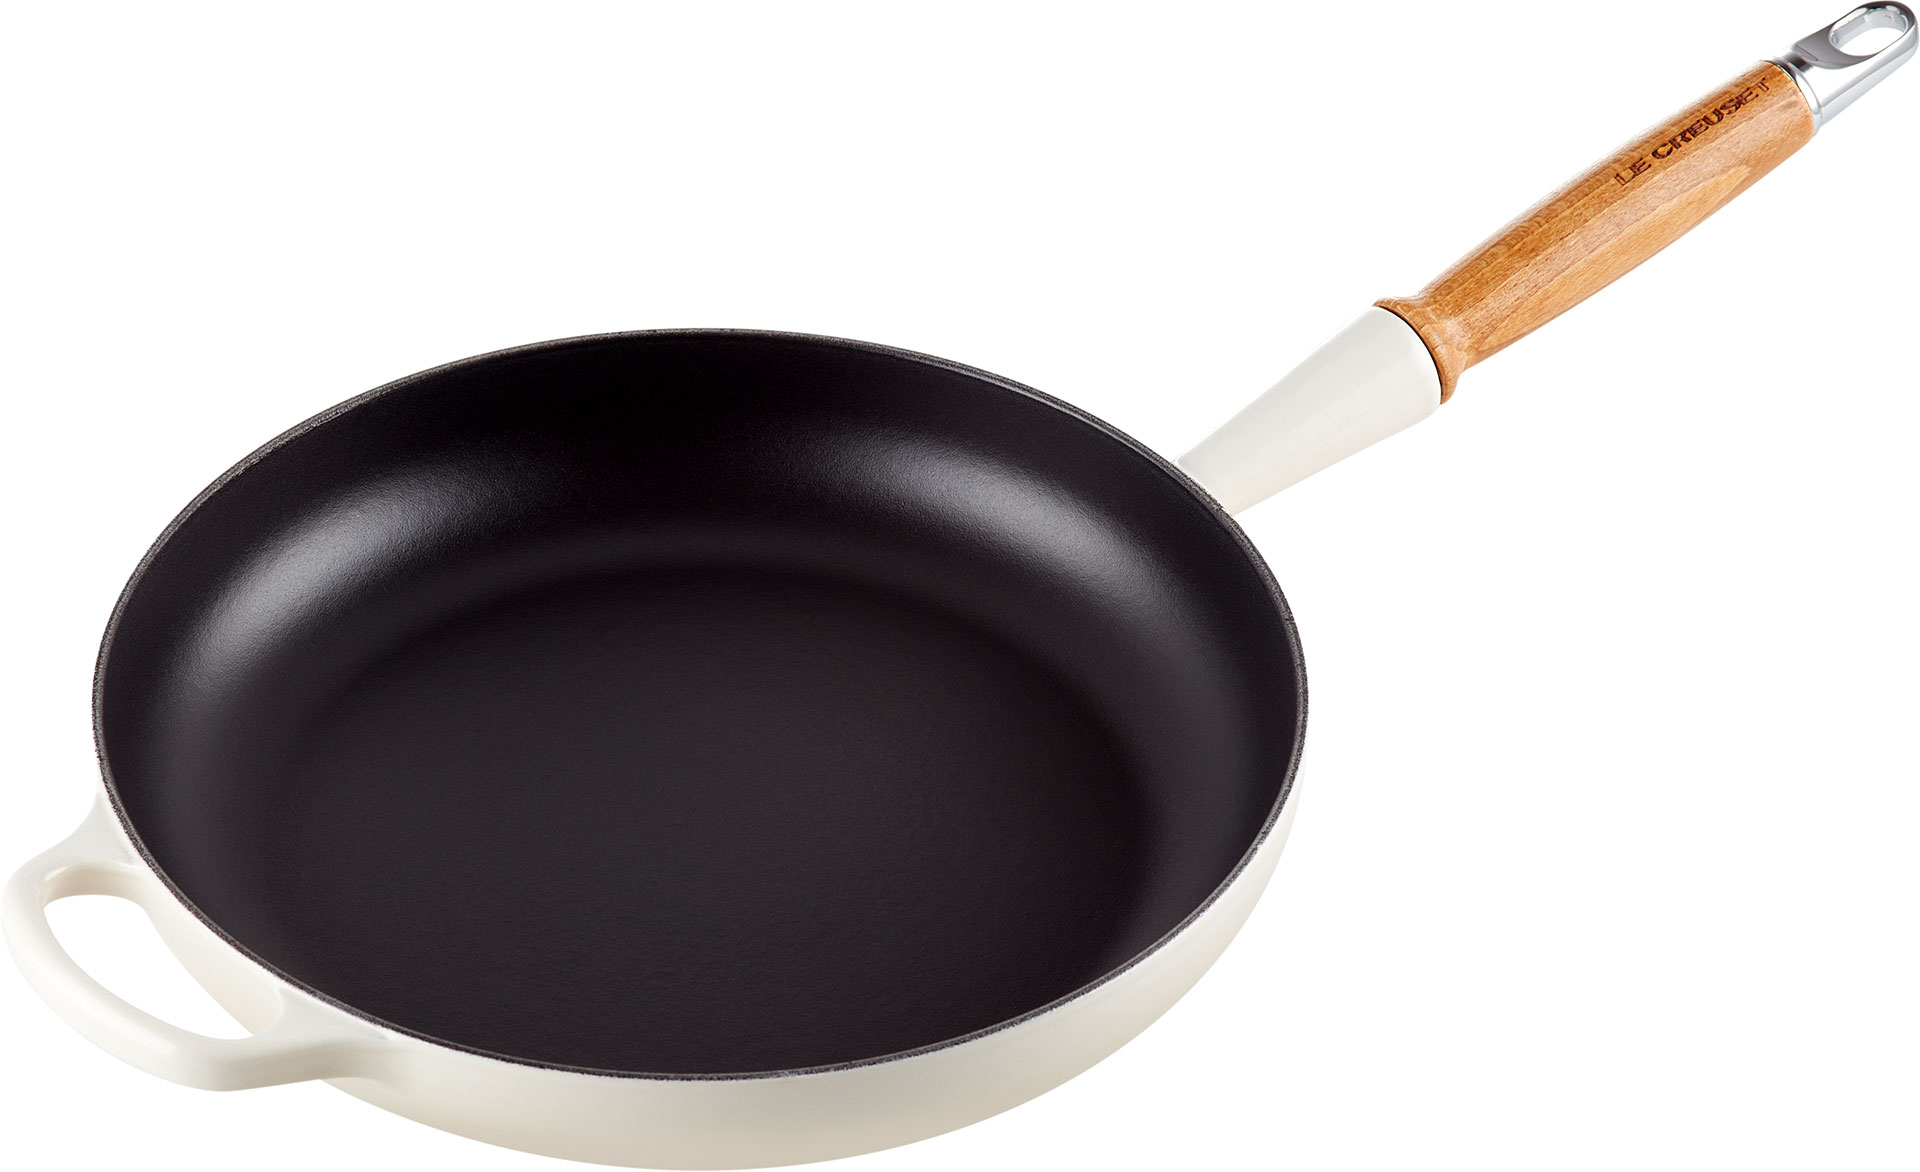 Le Creuset Signature Cast Iron Frying Pan with Wooden Handle